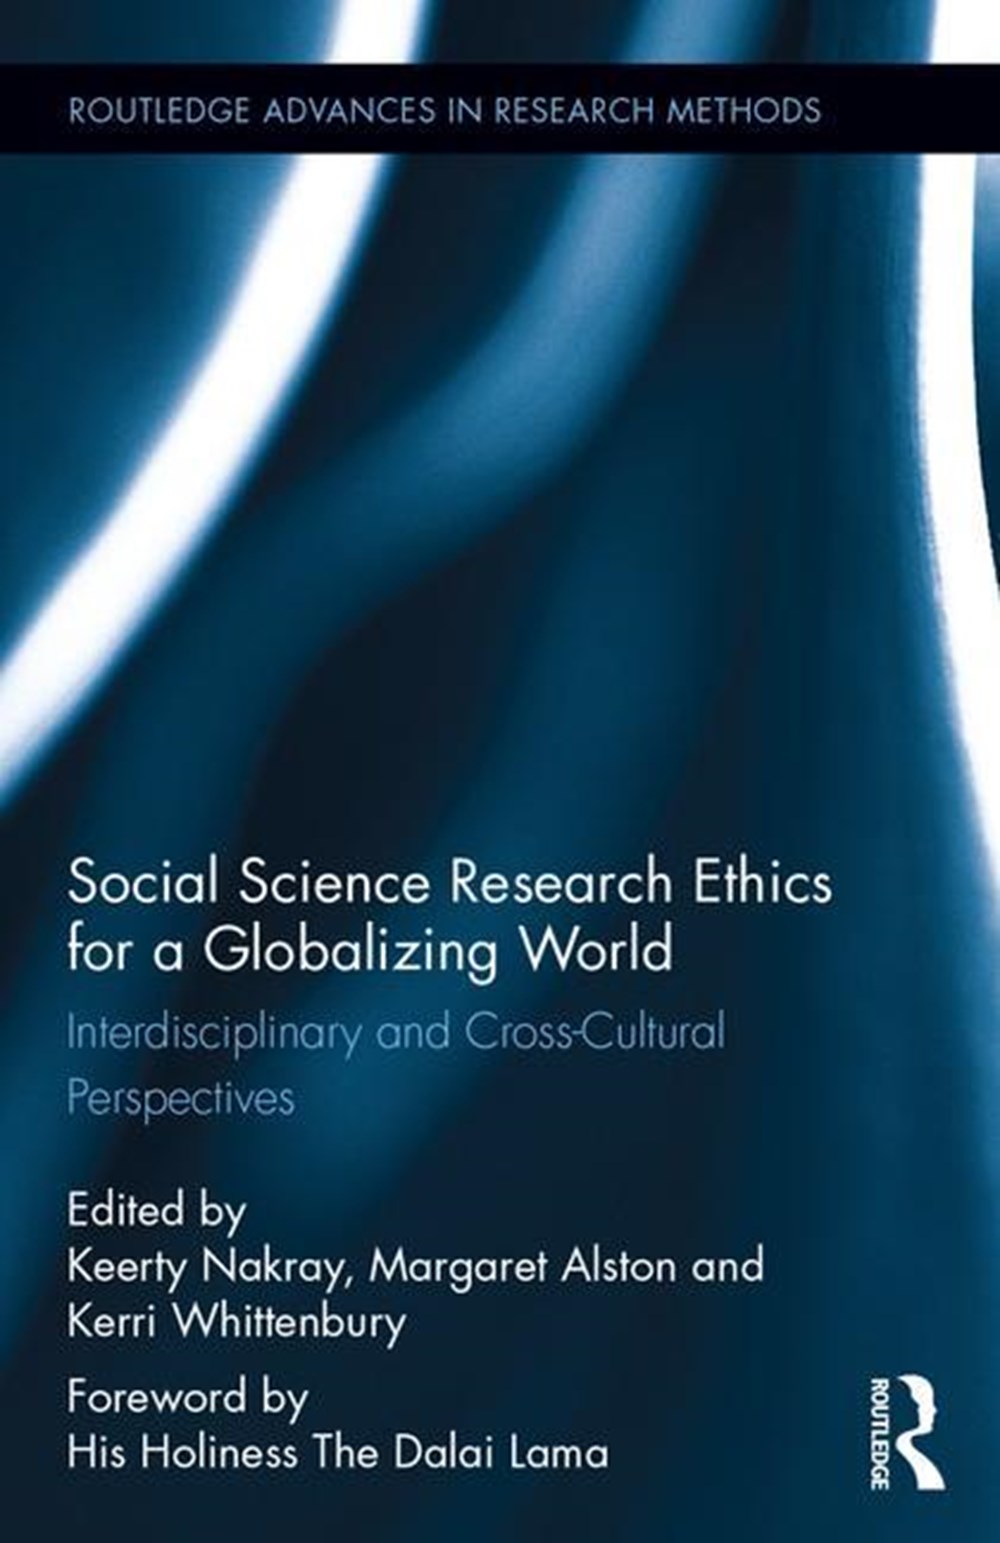 Social Science Research Ethics for a Globalizing World: Interdisciplinary and Cross-Cultural Perspec